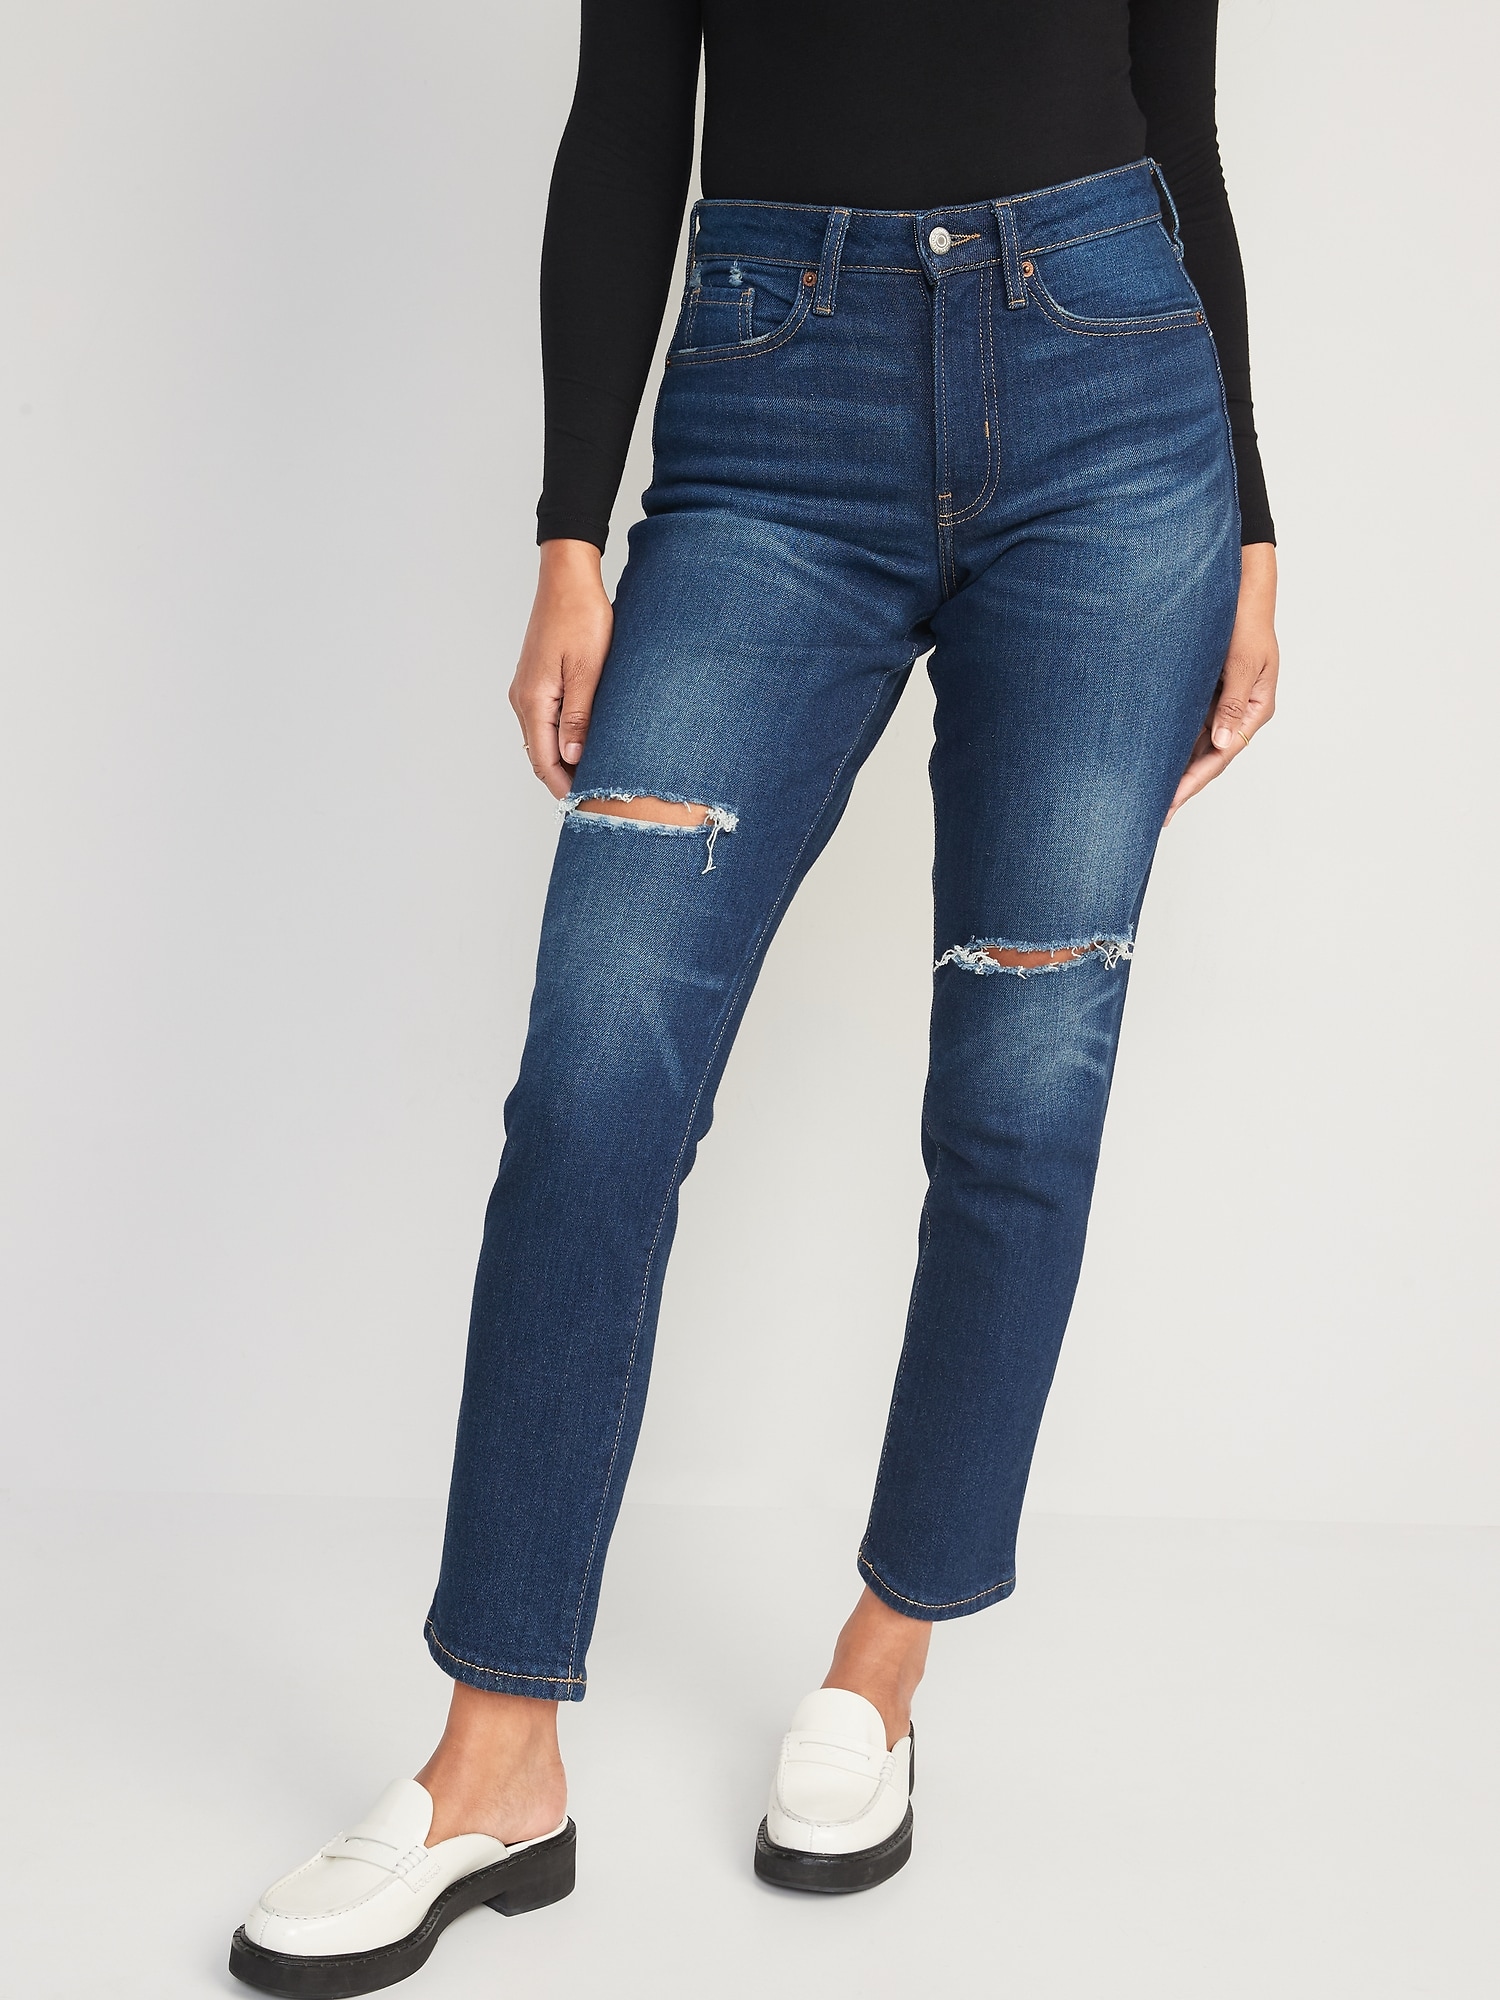 Curvy High-Waisted OG Straight Ripped Ankle Jeans for Women